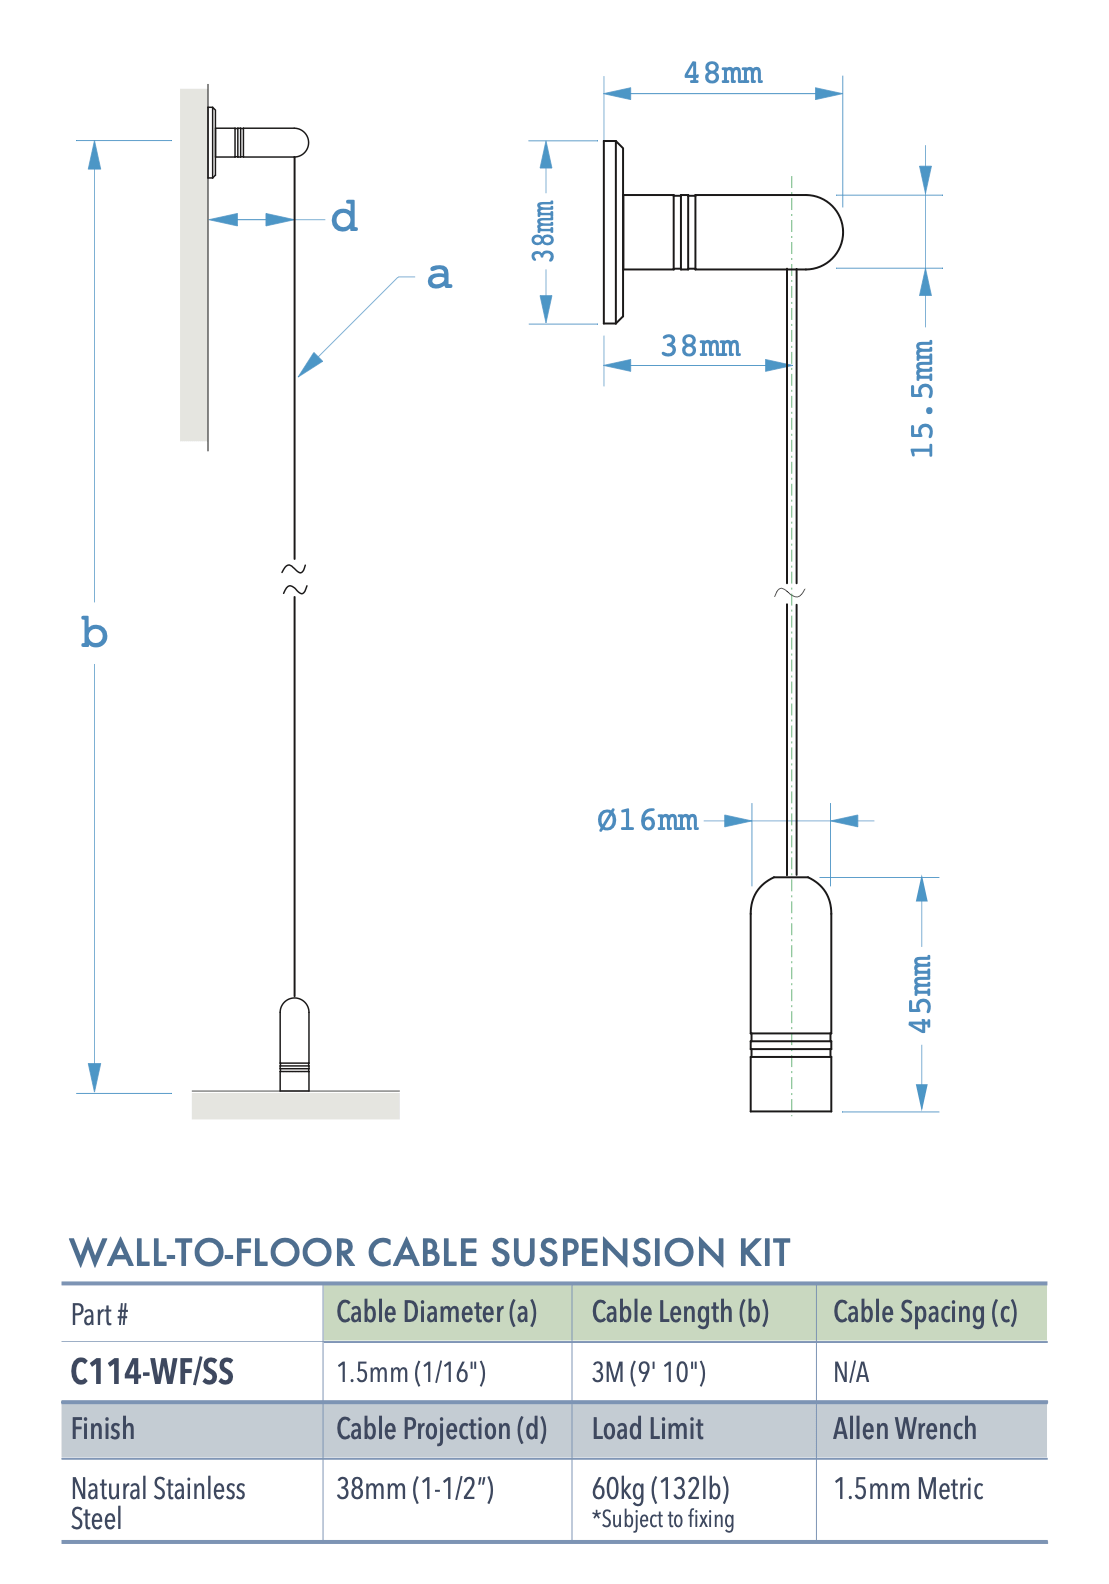 Specifications for C114-WF/SS